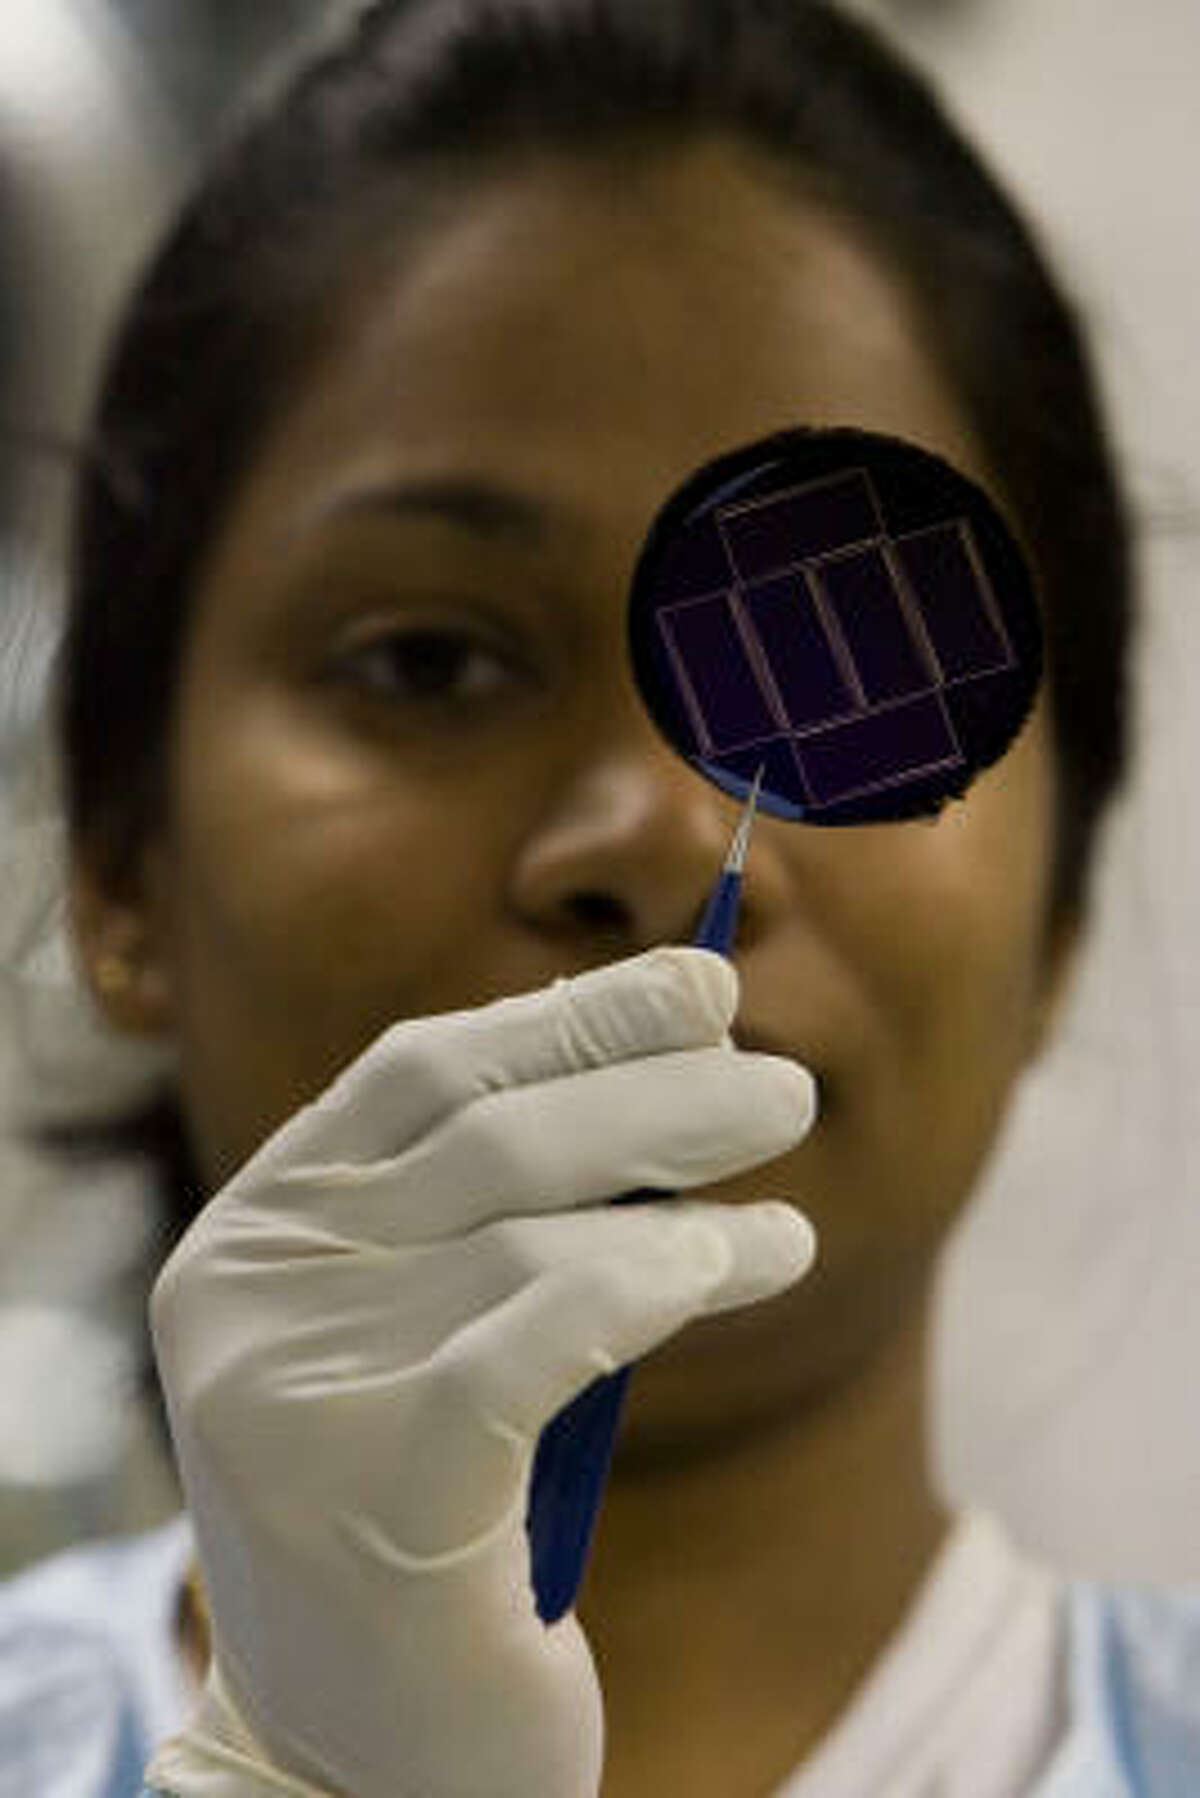 University of Houston doctoral student Chandani Rajapaksha examines a solar cell created at the University of Houston’s Center for Advanced Materials.